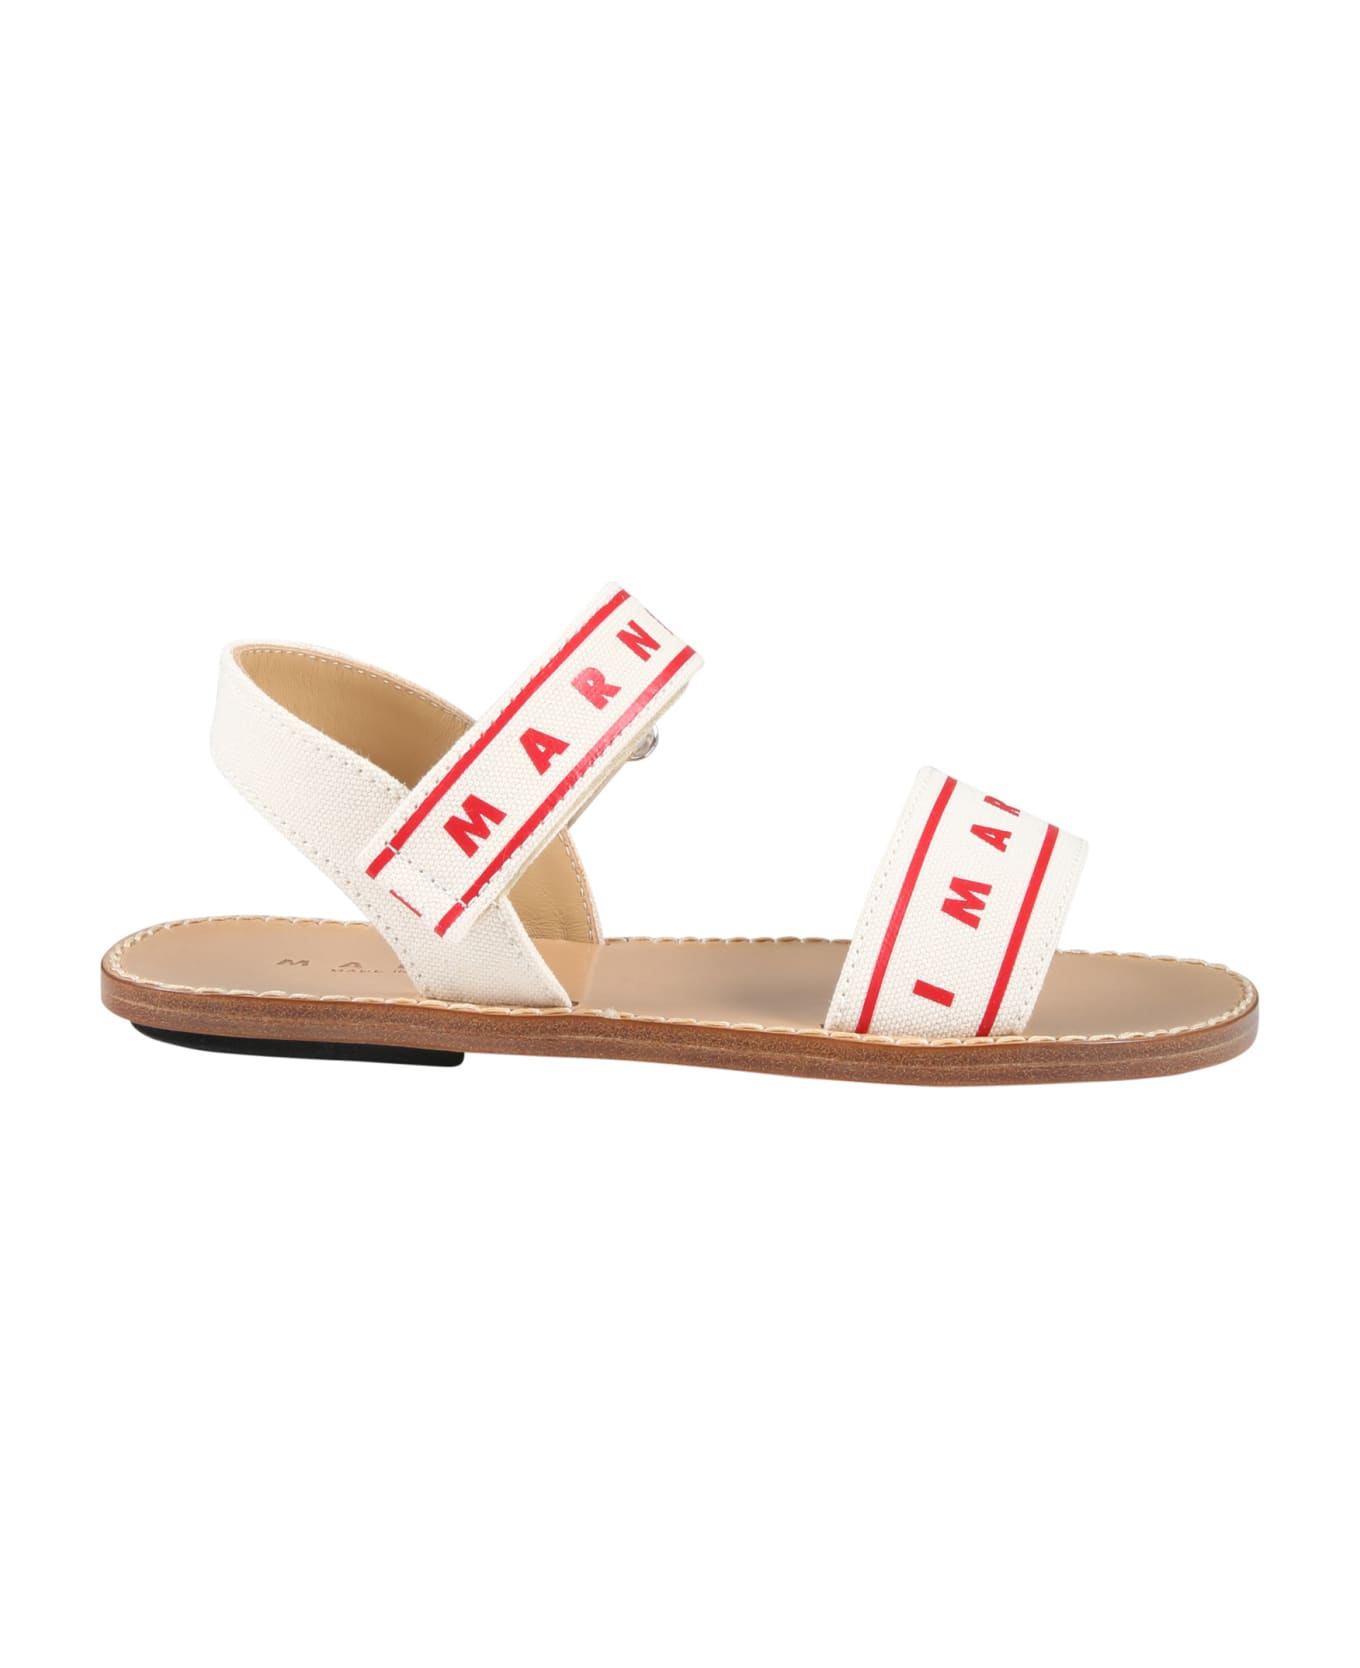 Marni Multicolor Sandals For Girl With Red Logo - Multicolor シューズ